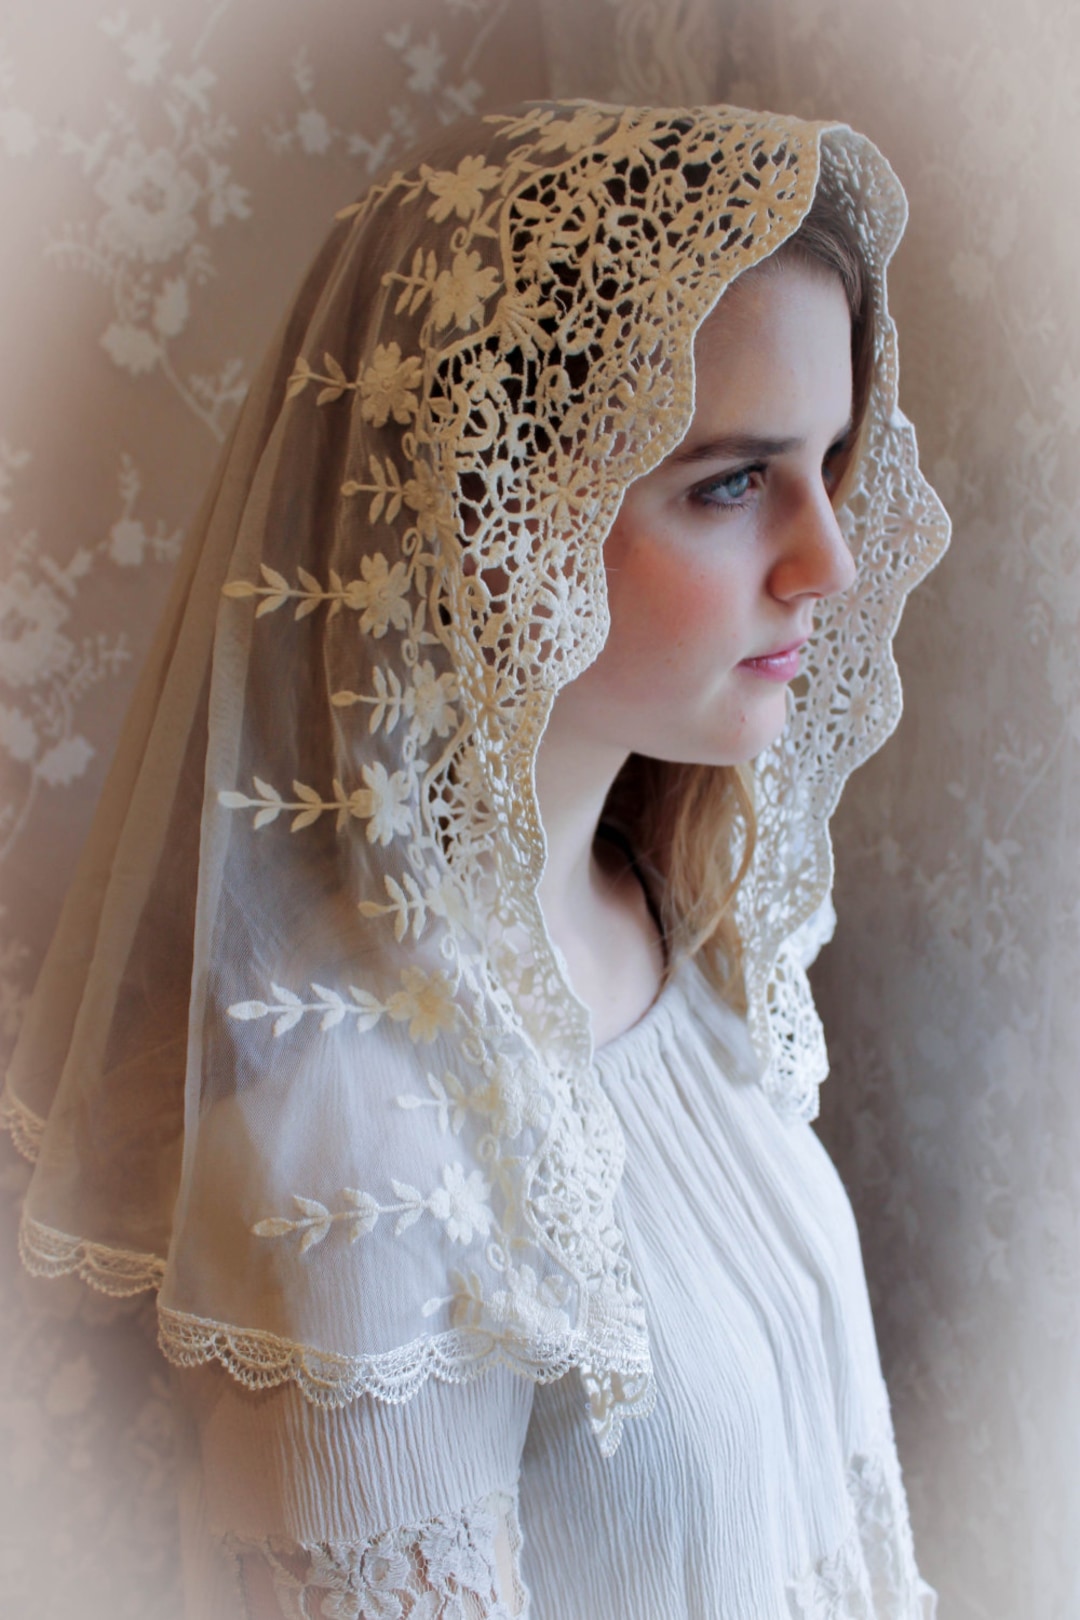 Needzo Long Chapel Veils for Church, Two Tone Ivory Veil for Catholic Mass,  Traditional Lace Head Coverings for Women, 24 Inches